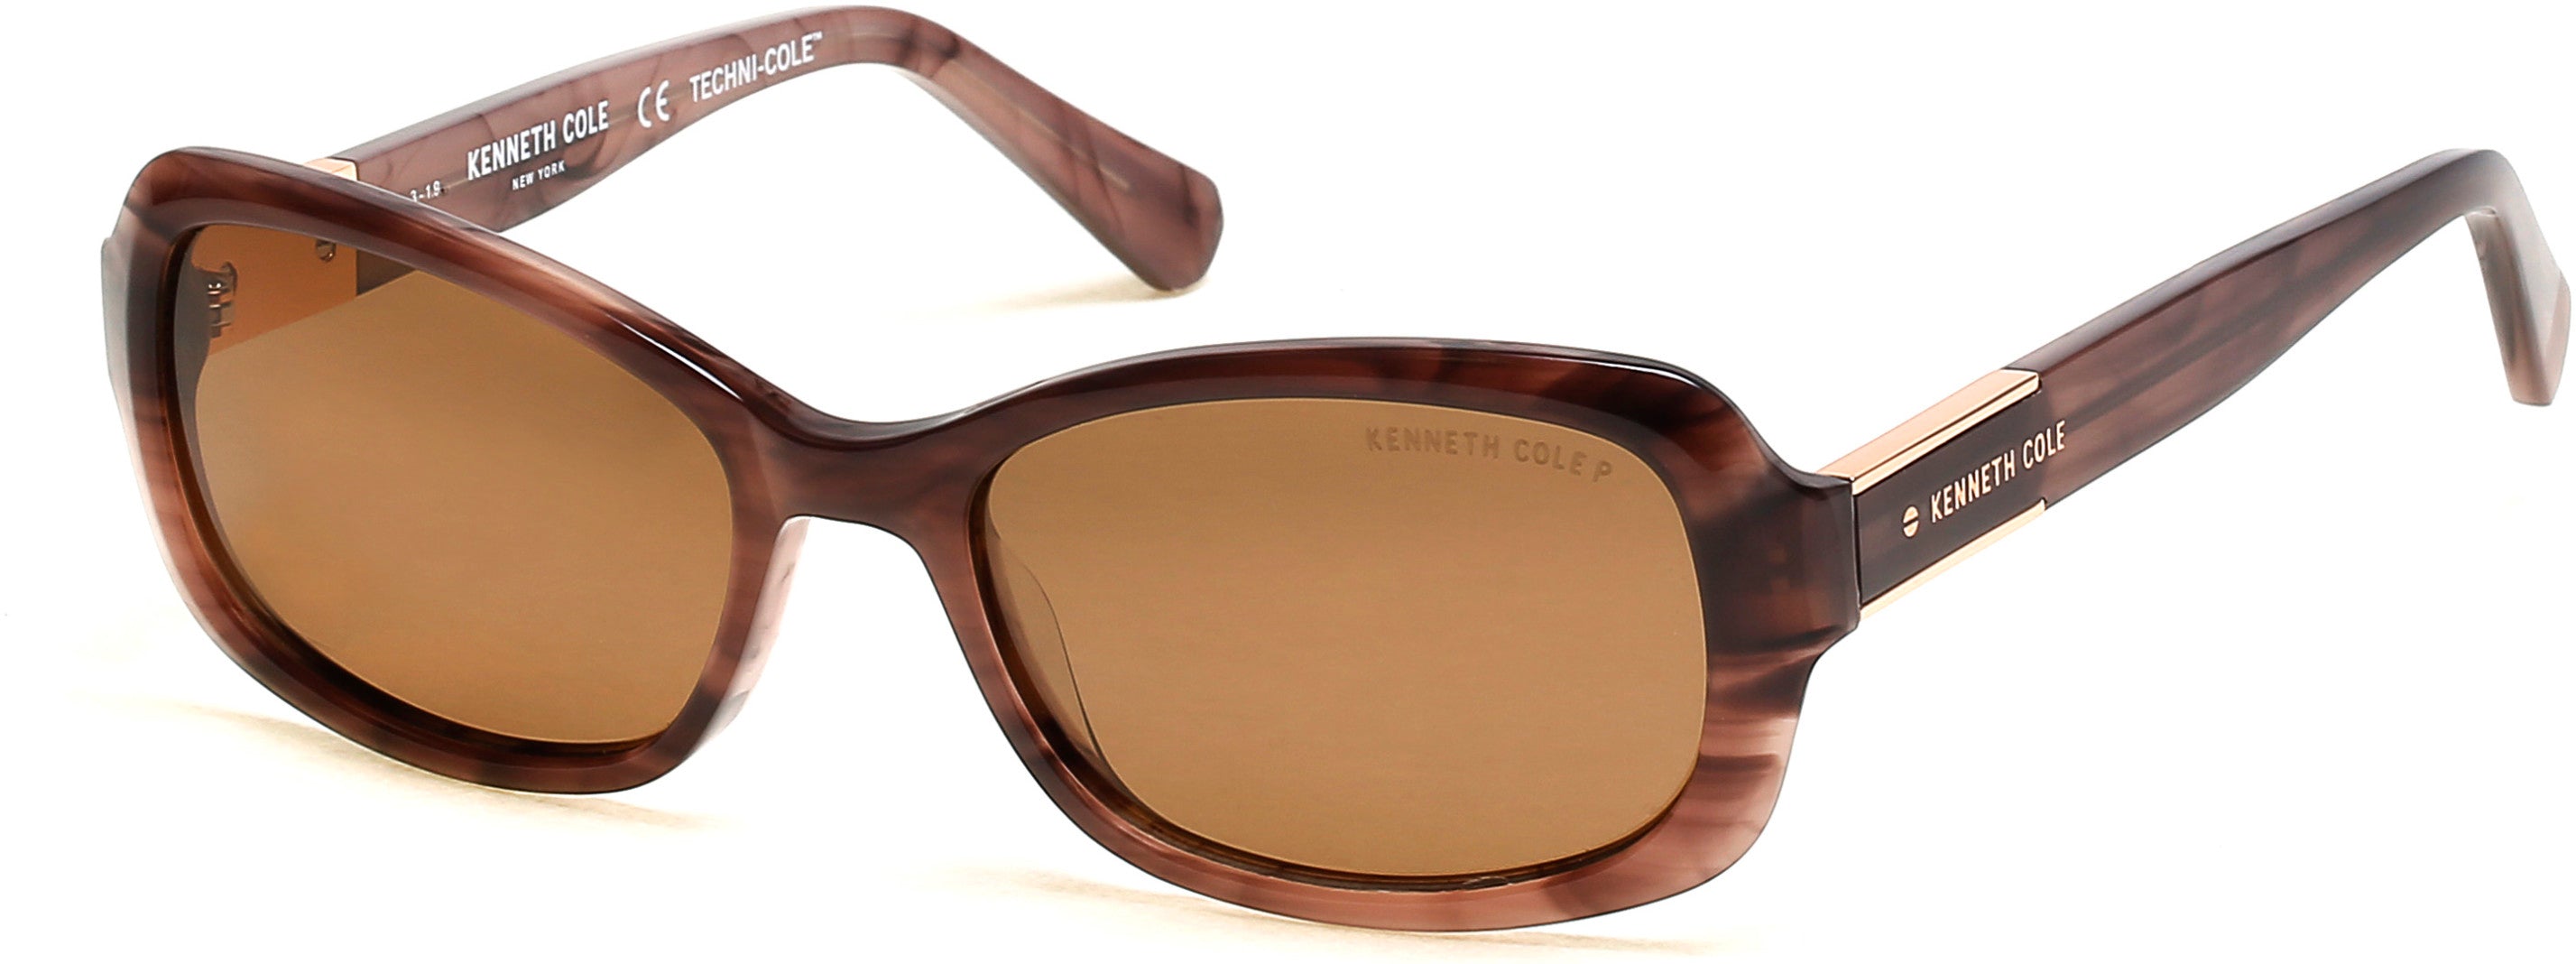 Kenneth Cole New York,Kenneth Cole Reaction KC7241 Oval Sunglasses 78H-78H - Shiny Lilac / Brown Polarized